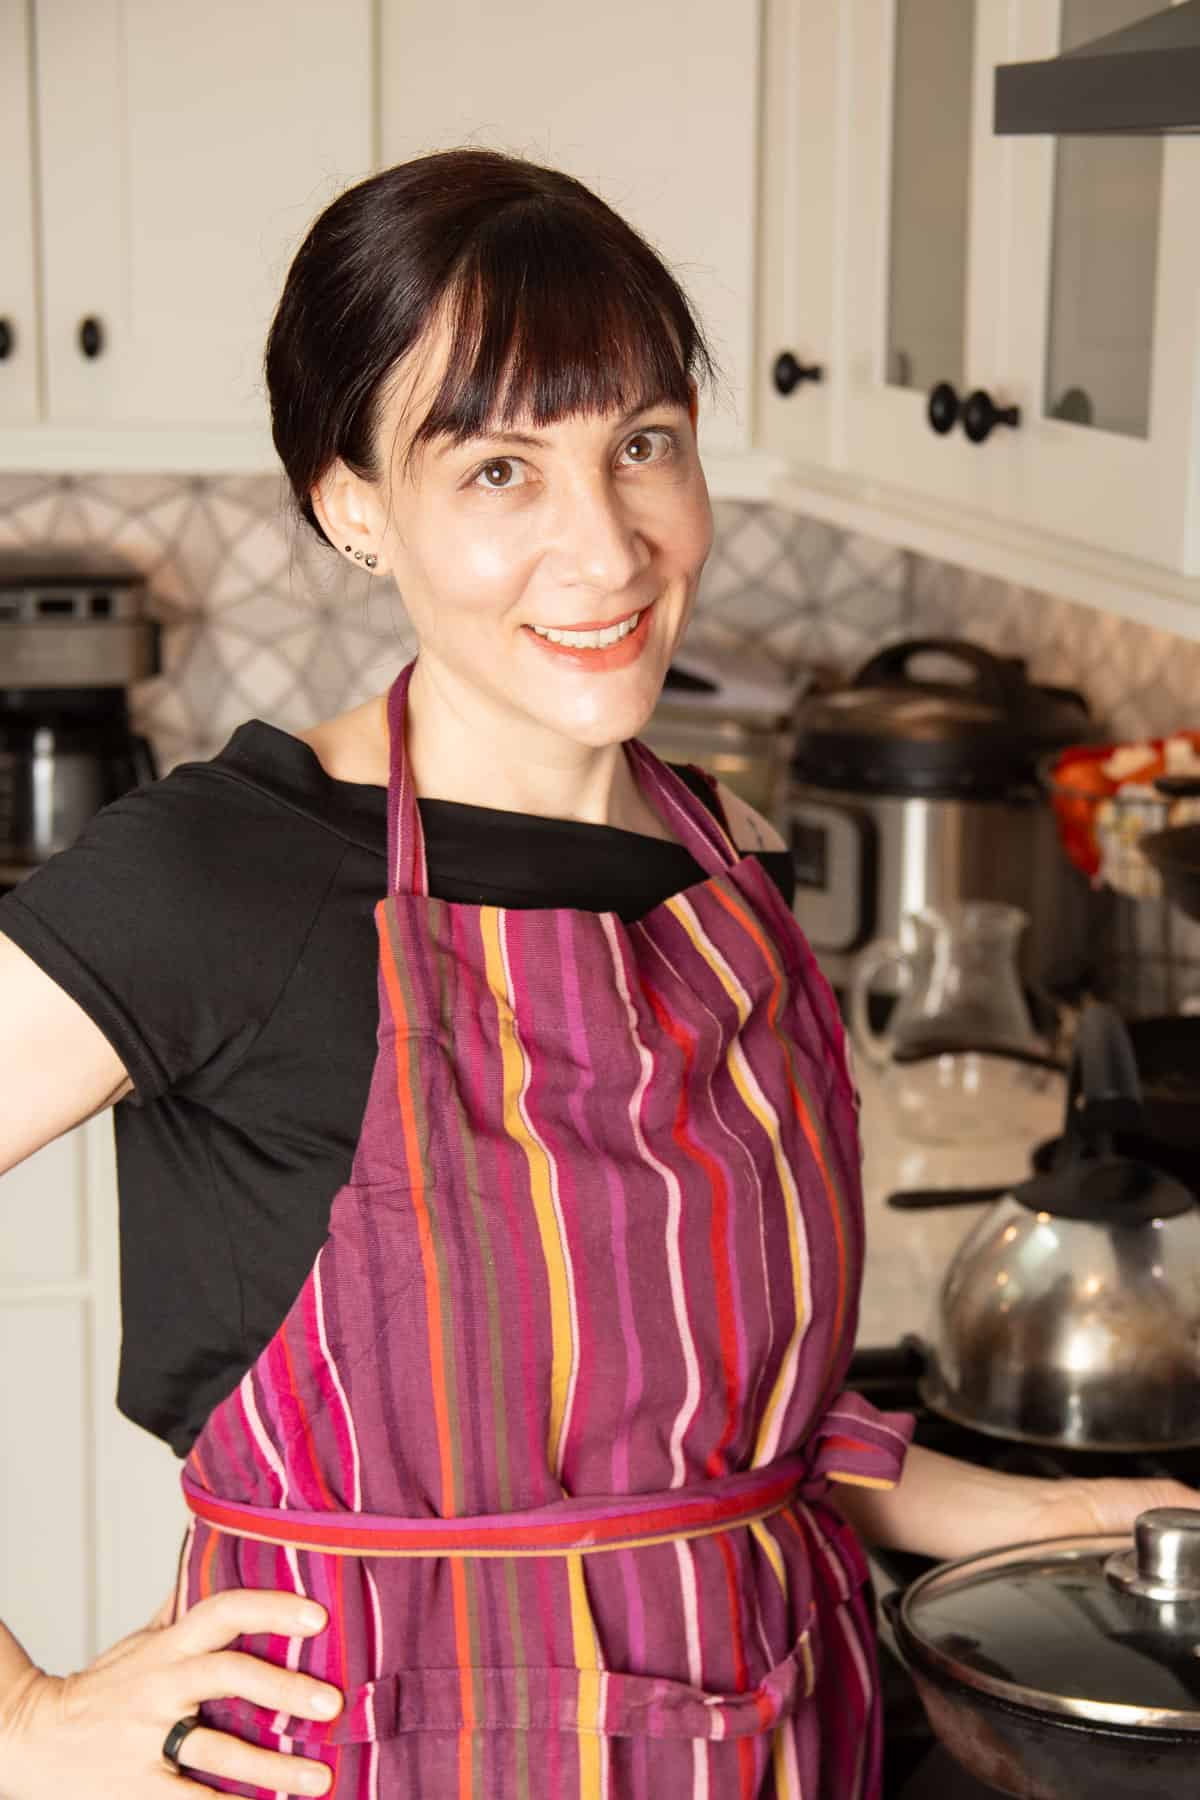 Alissa wearing an apron standing in the kitchen.